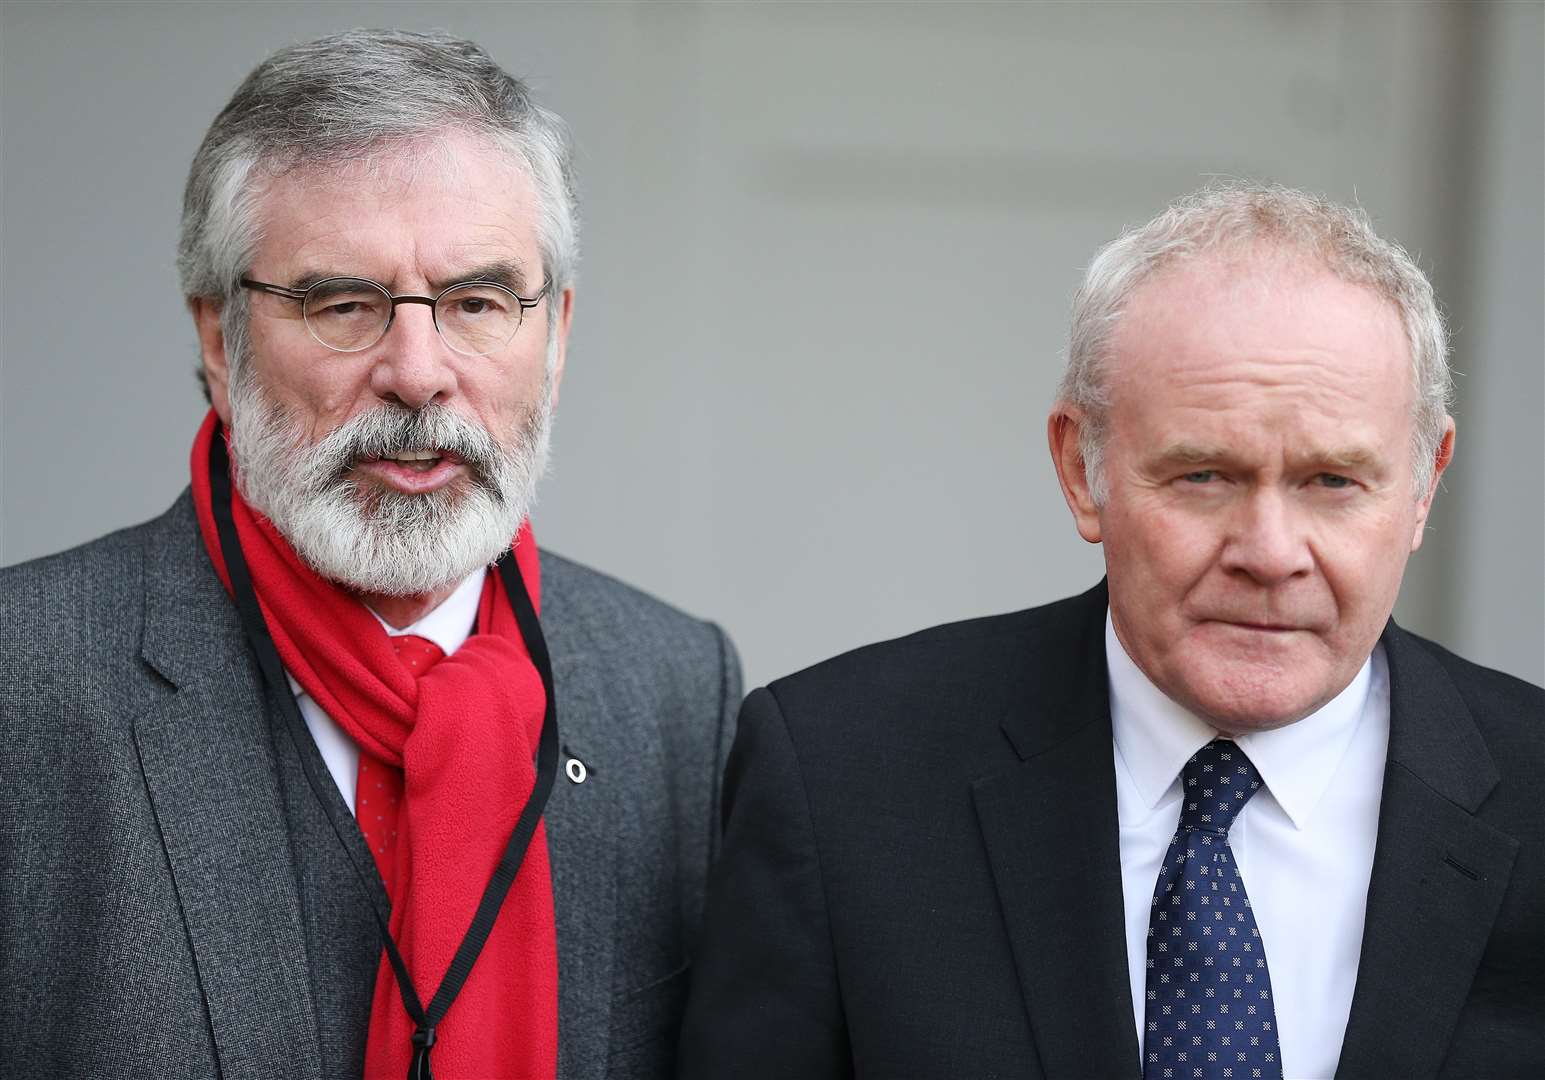 Gerry Adams (left) and Martin McGuinness. Records show the Sinn Fein leadership opposed the use of Parliament Buildings for the new Assembly (Brian Lawless/PA)